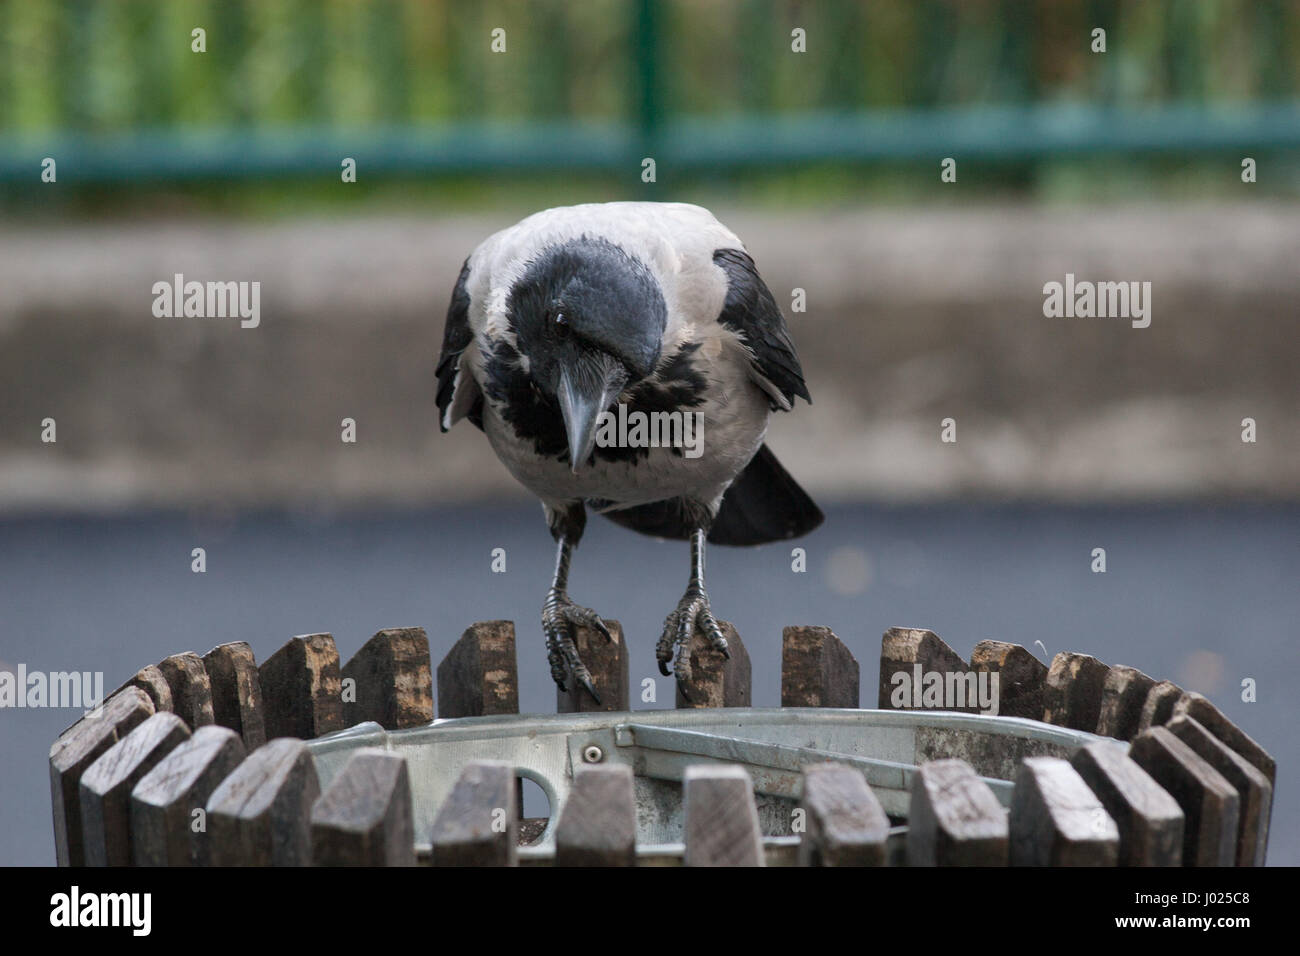 Crow on the bench. Animal in its natural environment, looking for food. Urban setting mixed with natural behavior. City animal and its life. Stock Photo